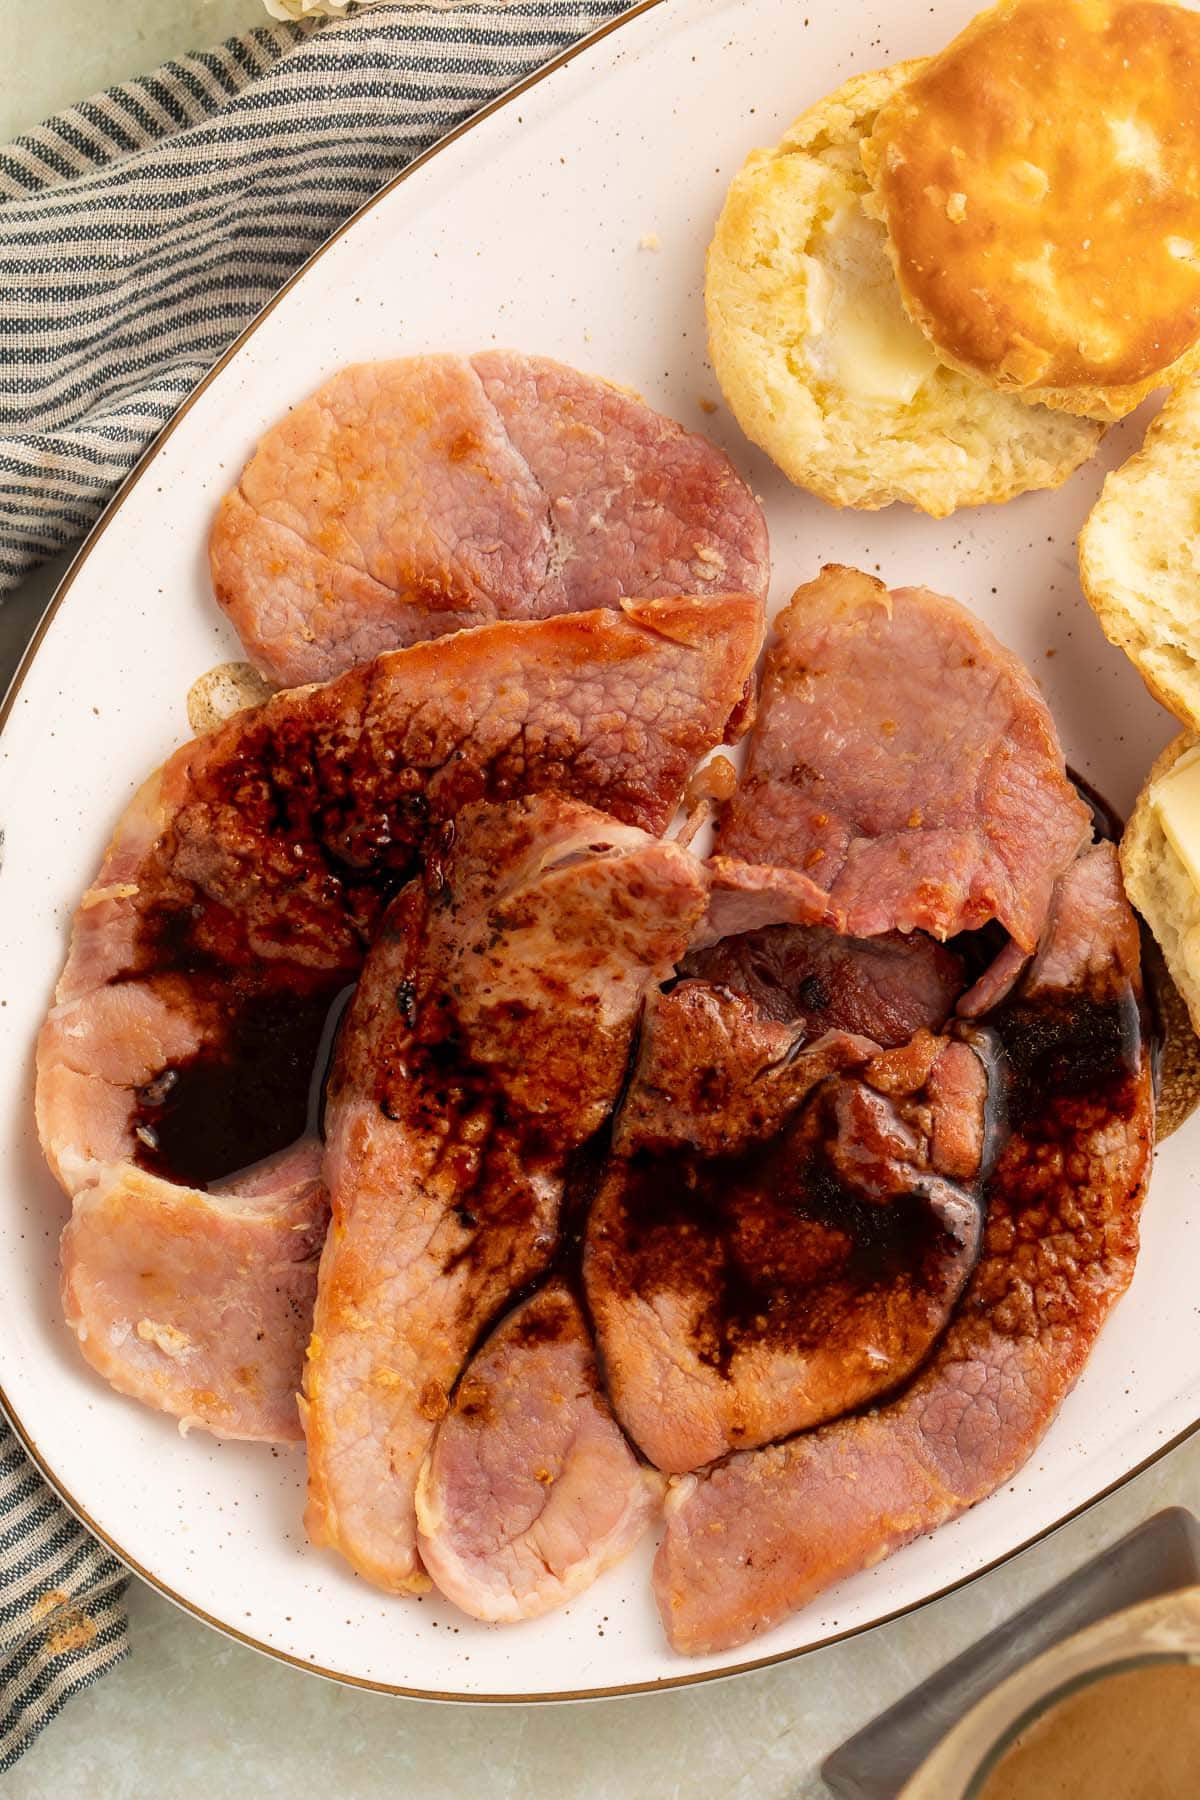 Red eye gravy poured over country ham on an oval platter with fluffy biscuits.